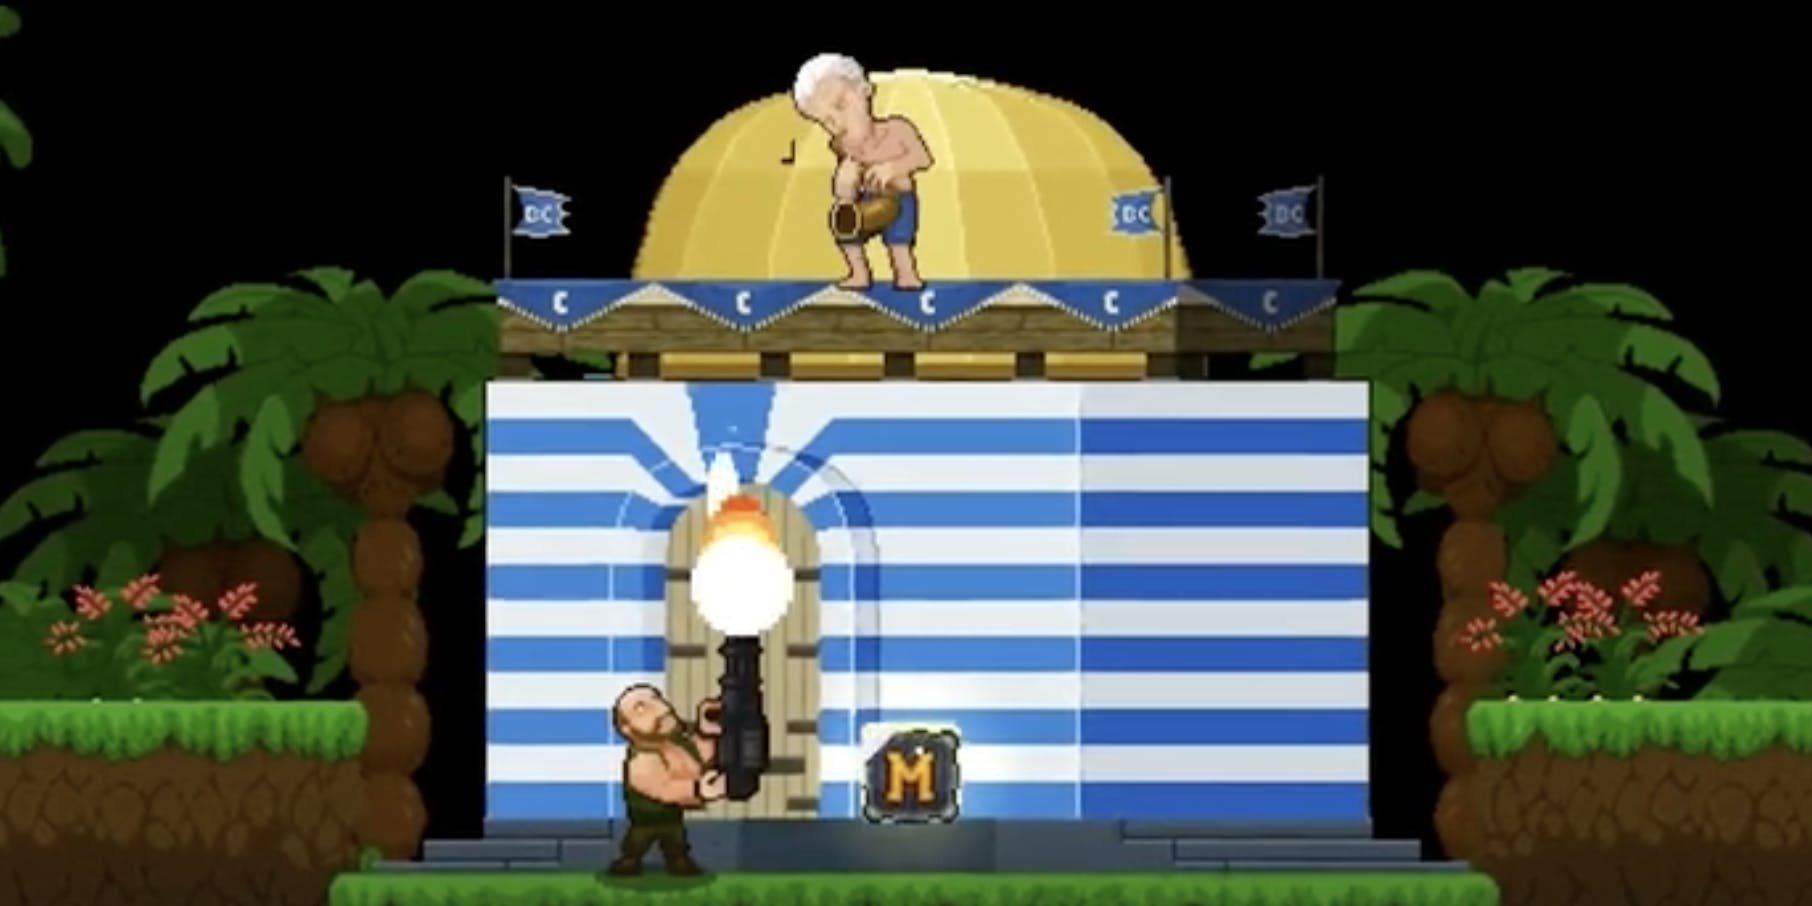 Alex Jones launches arcade-style video game—where you go to Epstein Island to hunt Bill Clinton